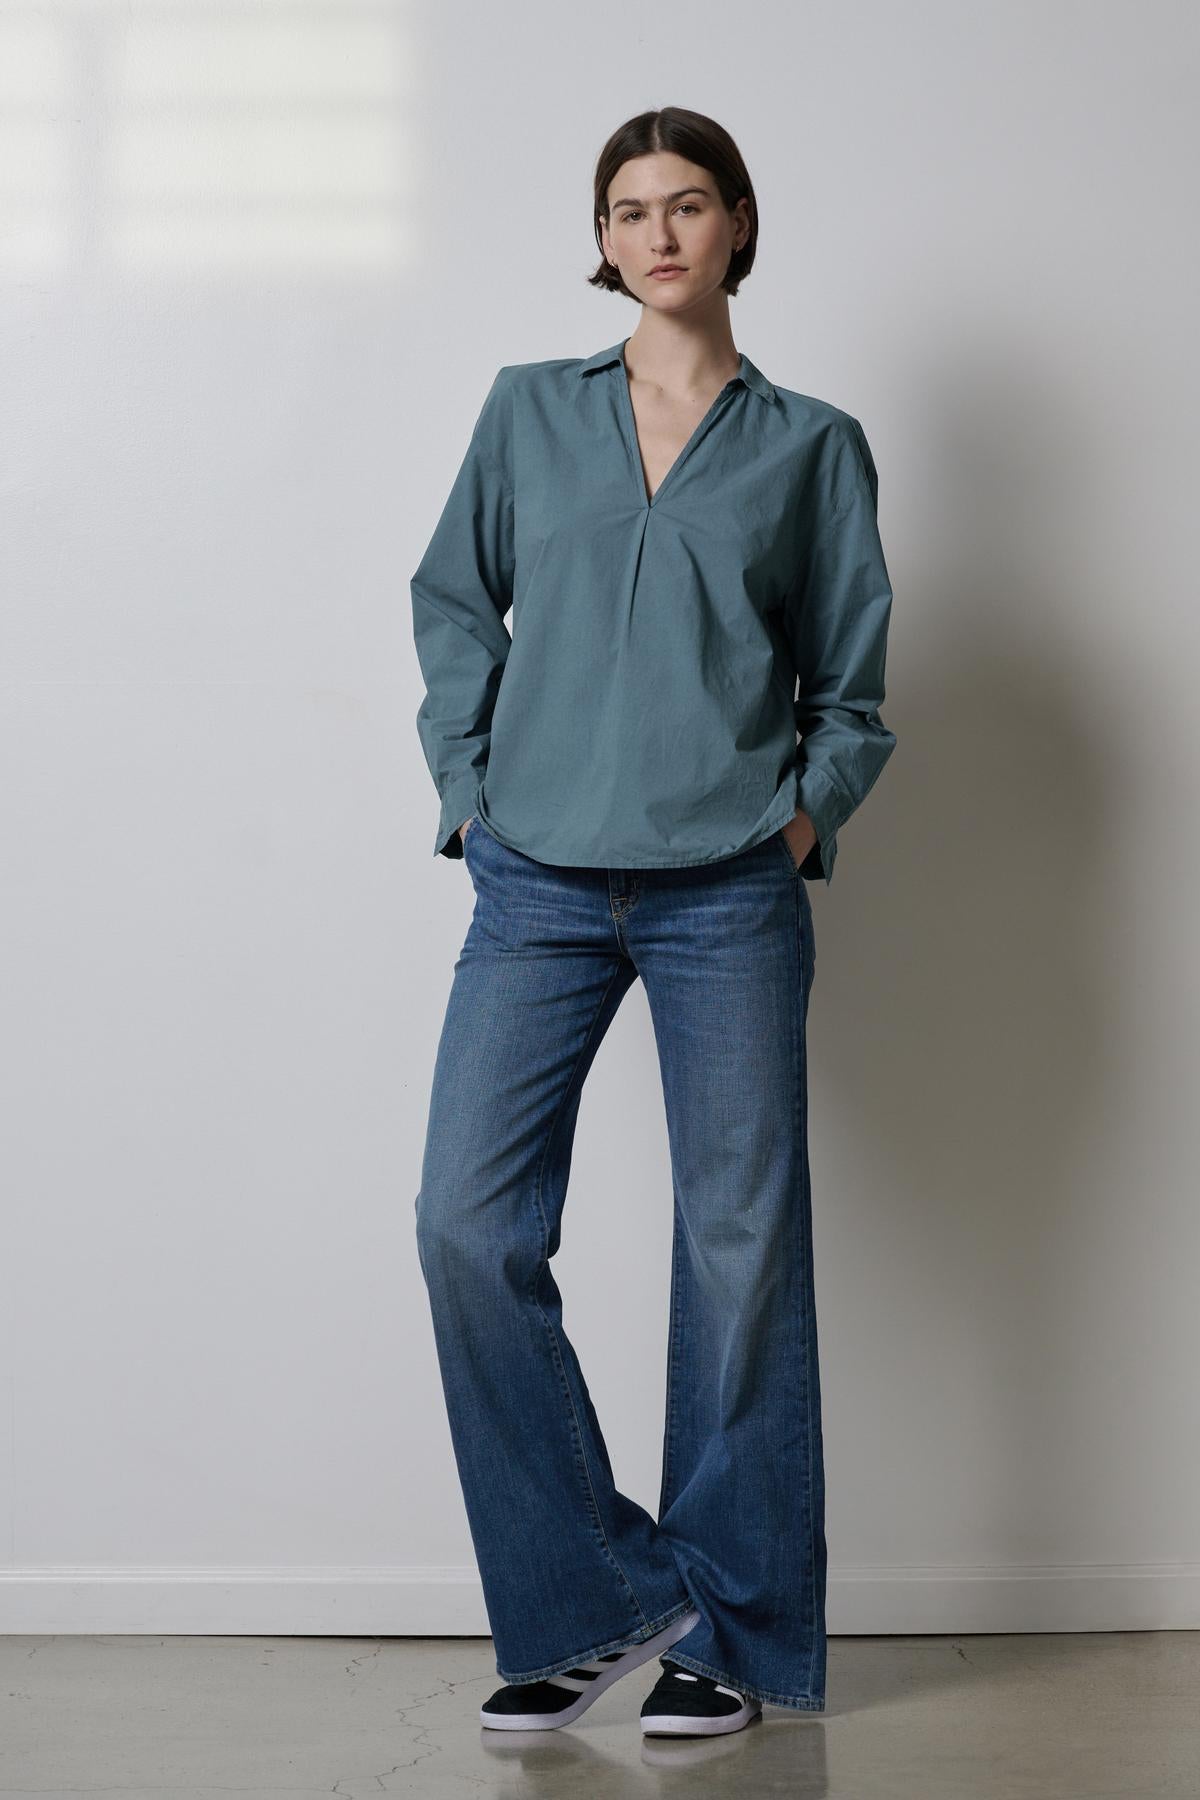 A woman wearing blue jeans and a Velvet by Jenny Graham BREA SHIRT full length-35190117597377